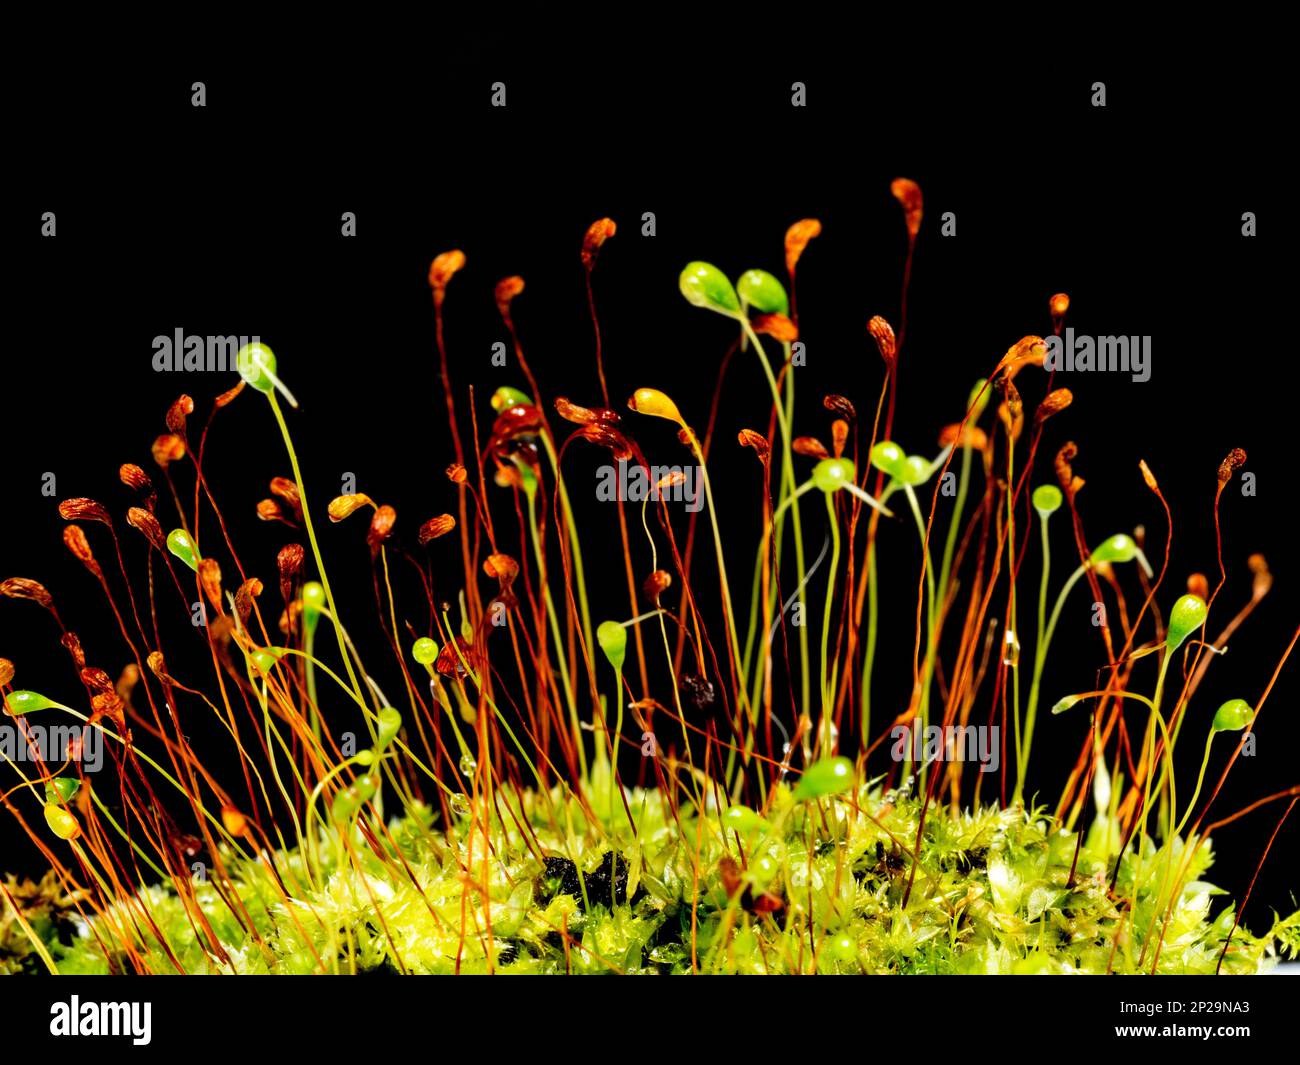 Seed heads of a moss plant photographed against a black background Stock Photo